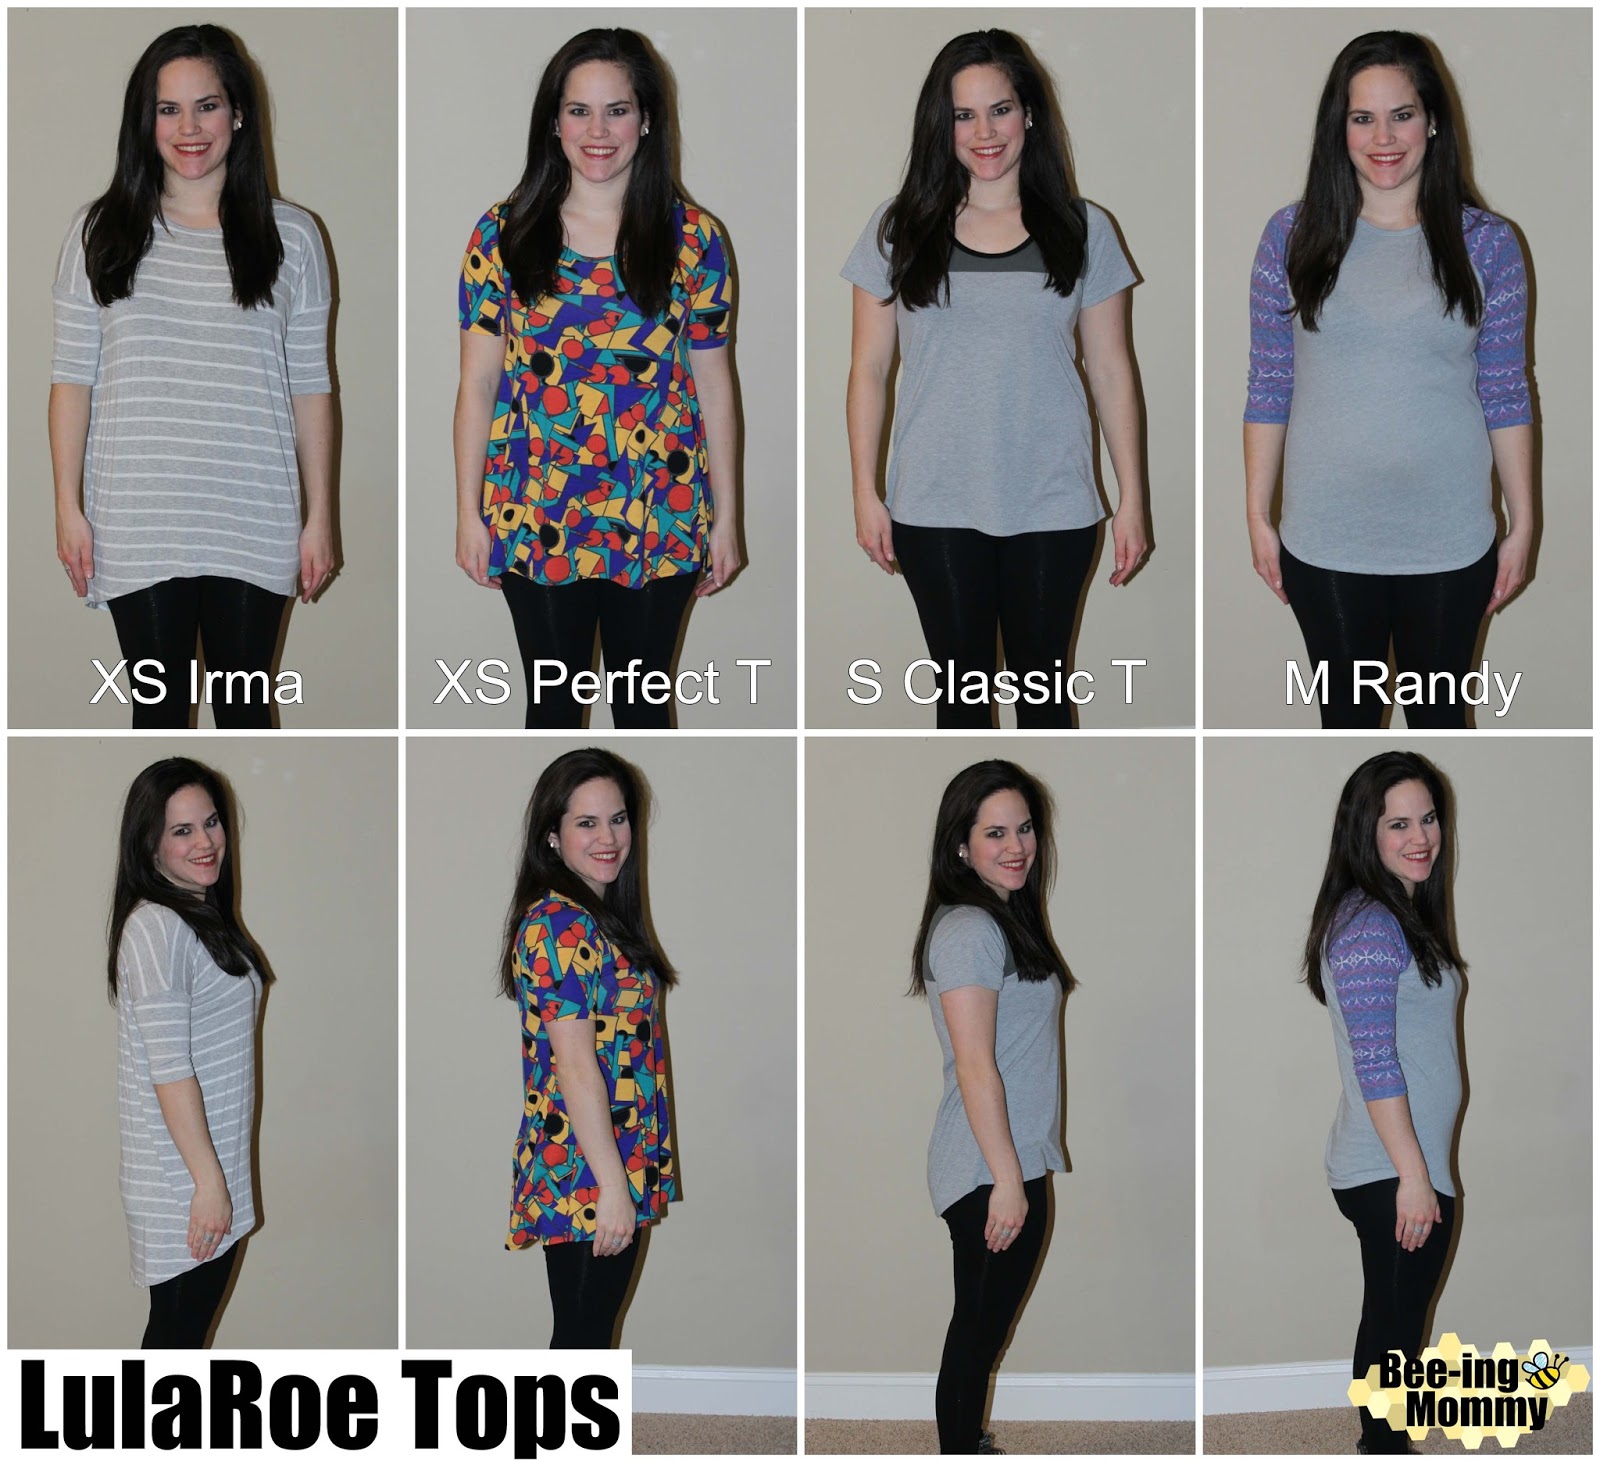 LulaRoe Part 3: Tops - different ways to style Irma, Perfect T, Classic T &  Randy